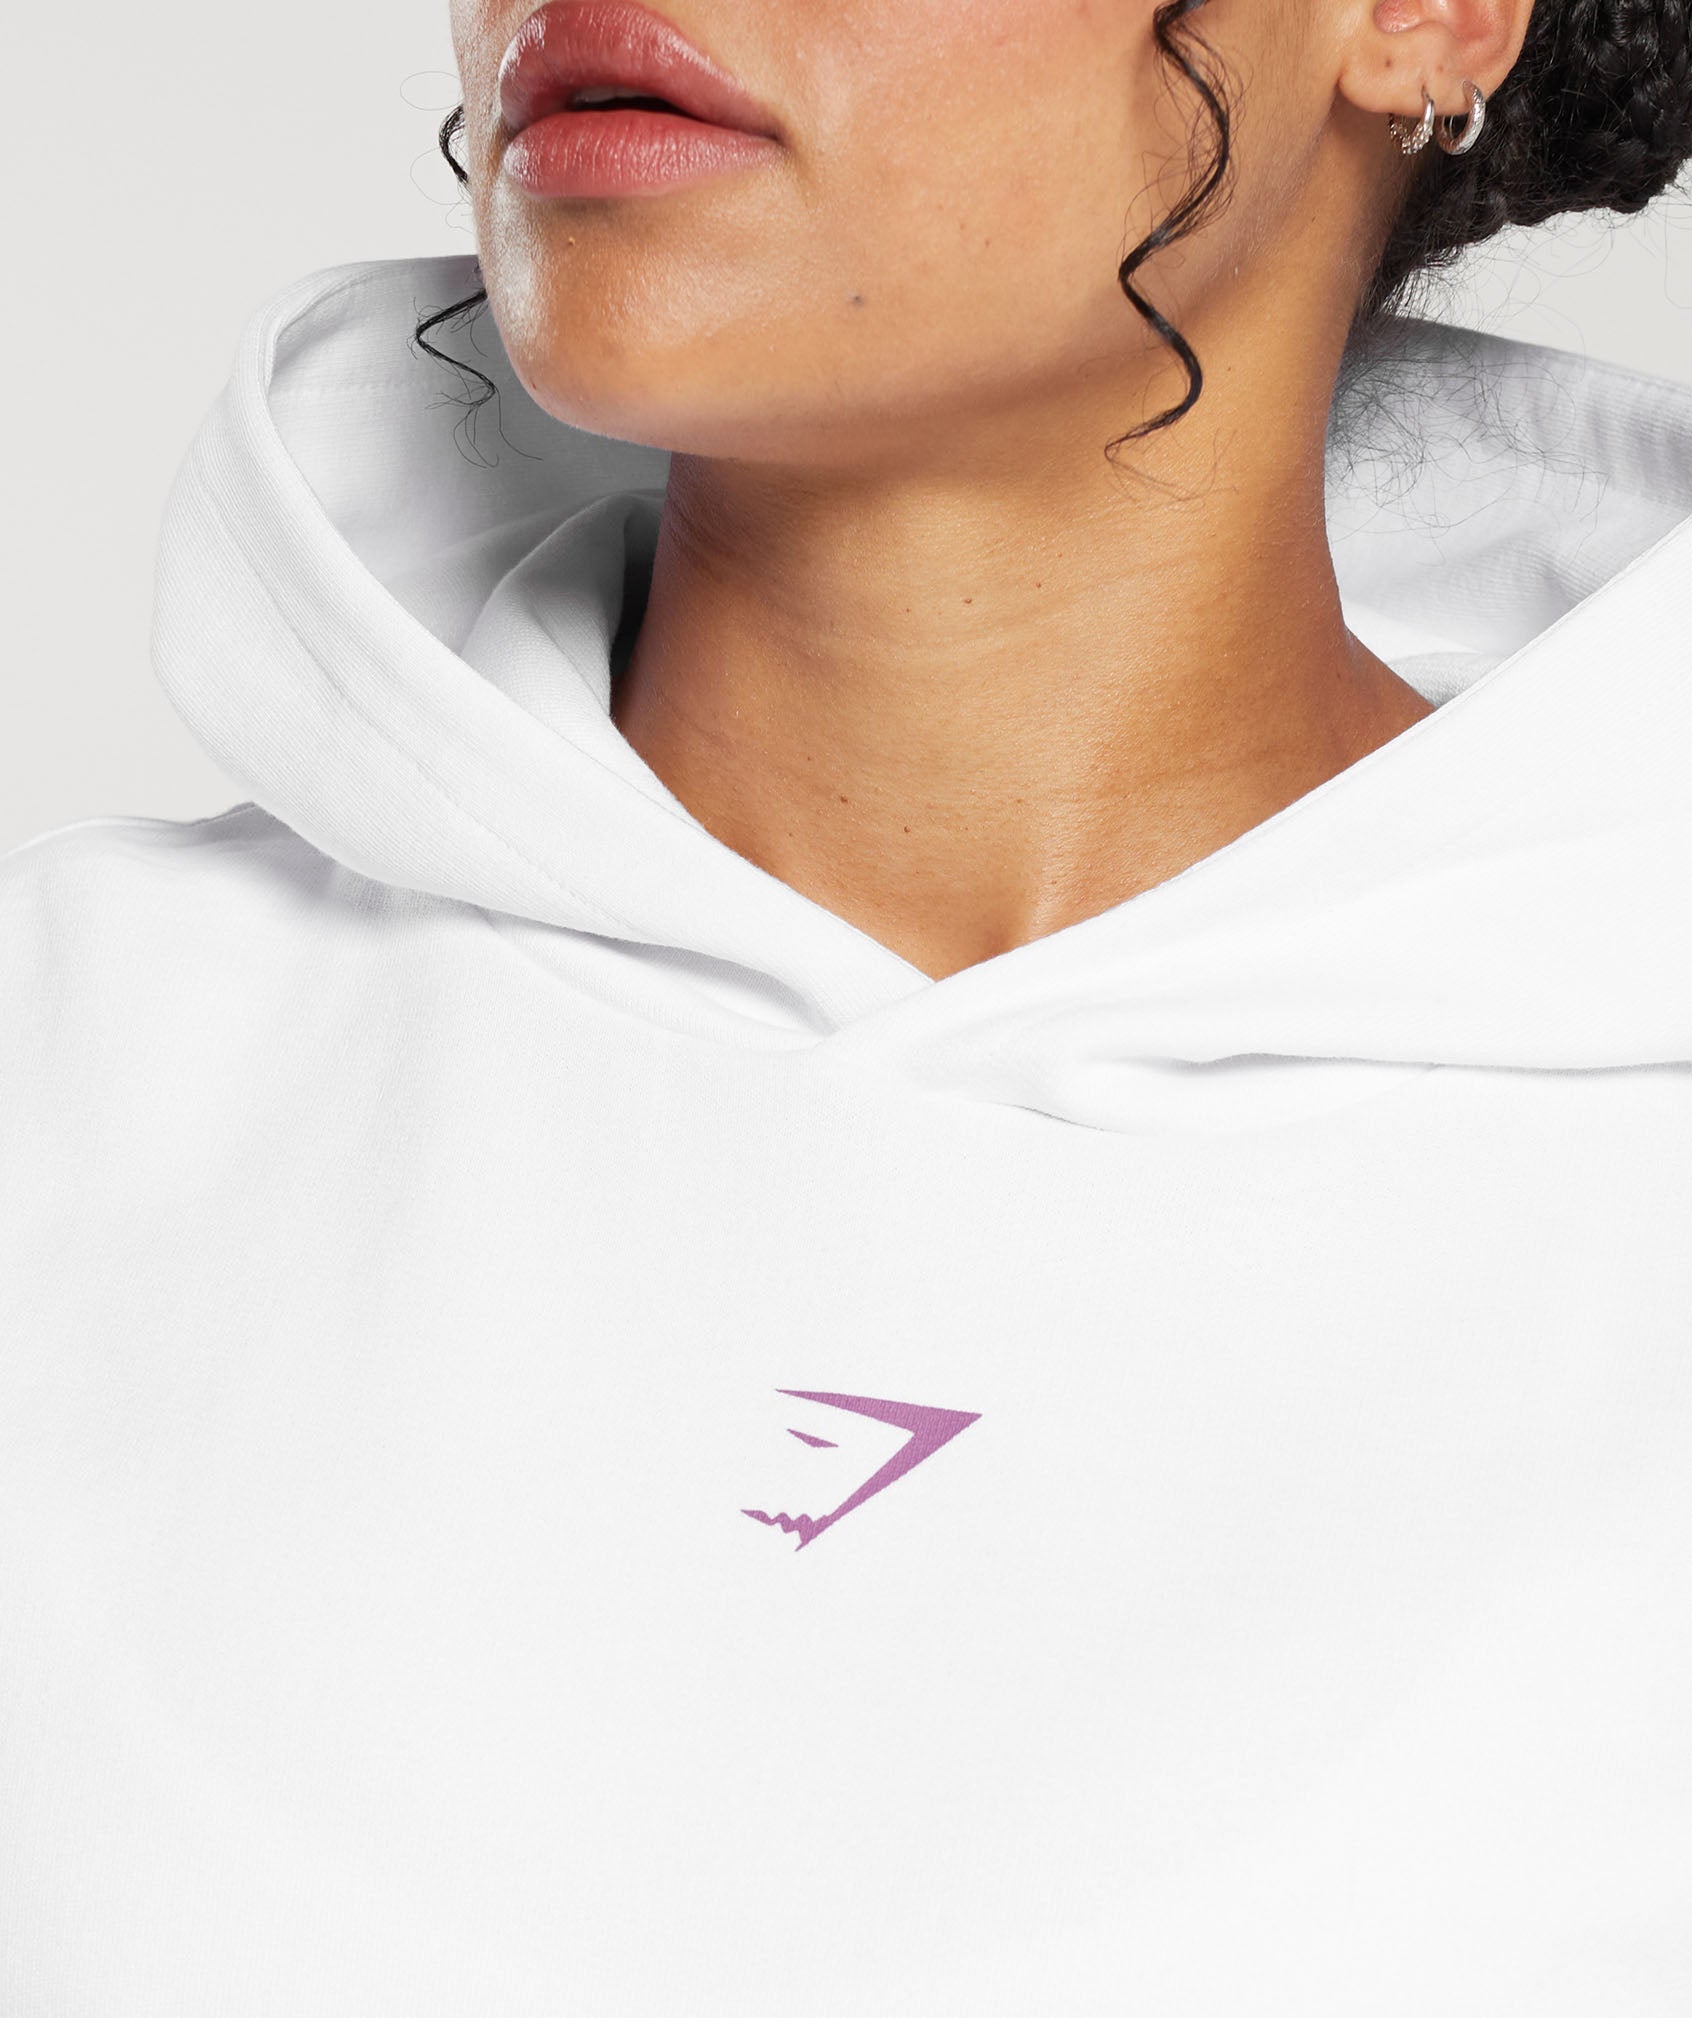 Movin' Metal GFX Hoodie in White - view 6